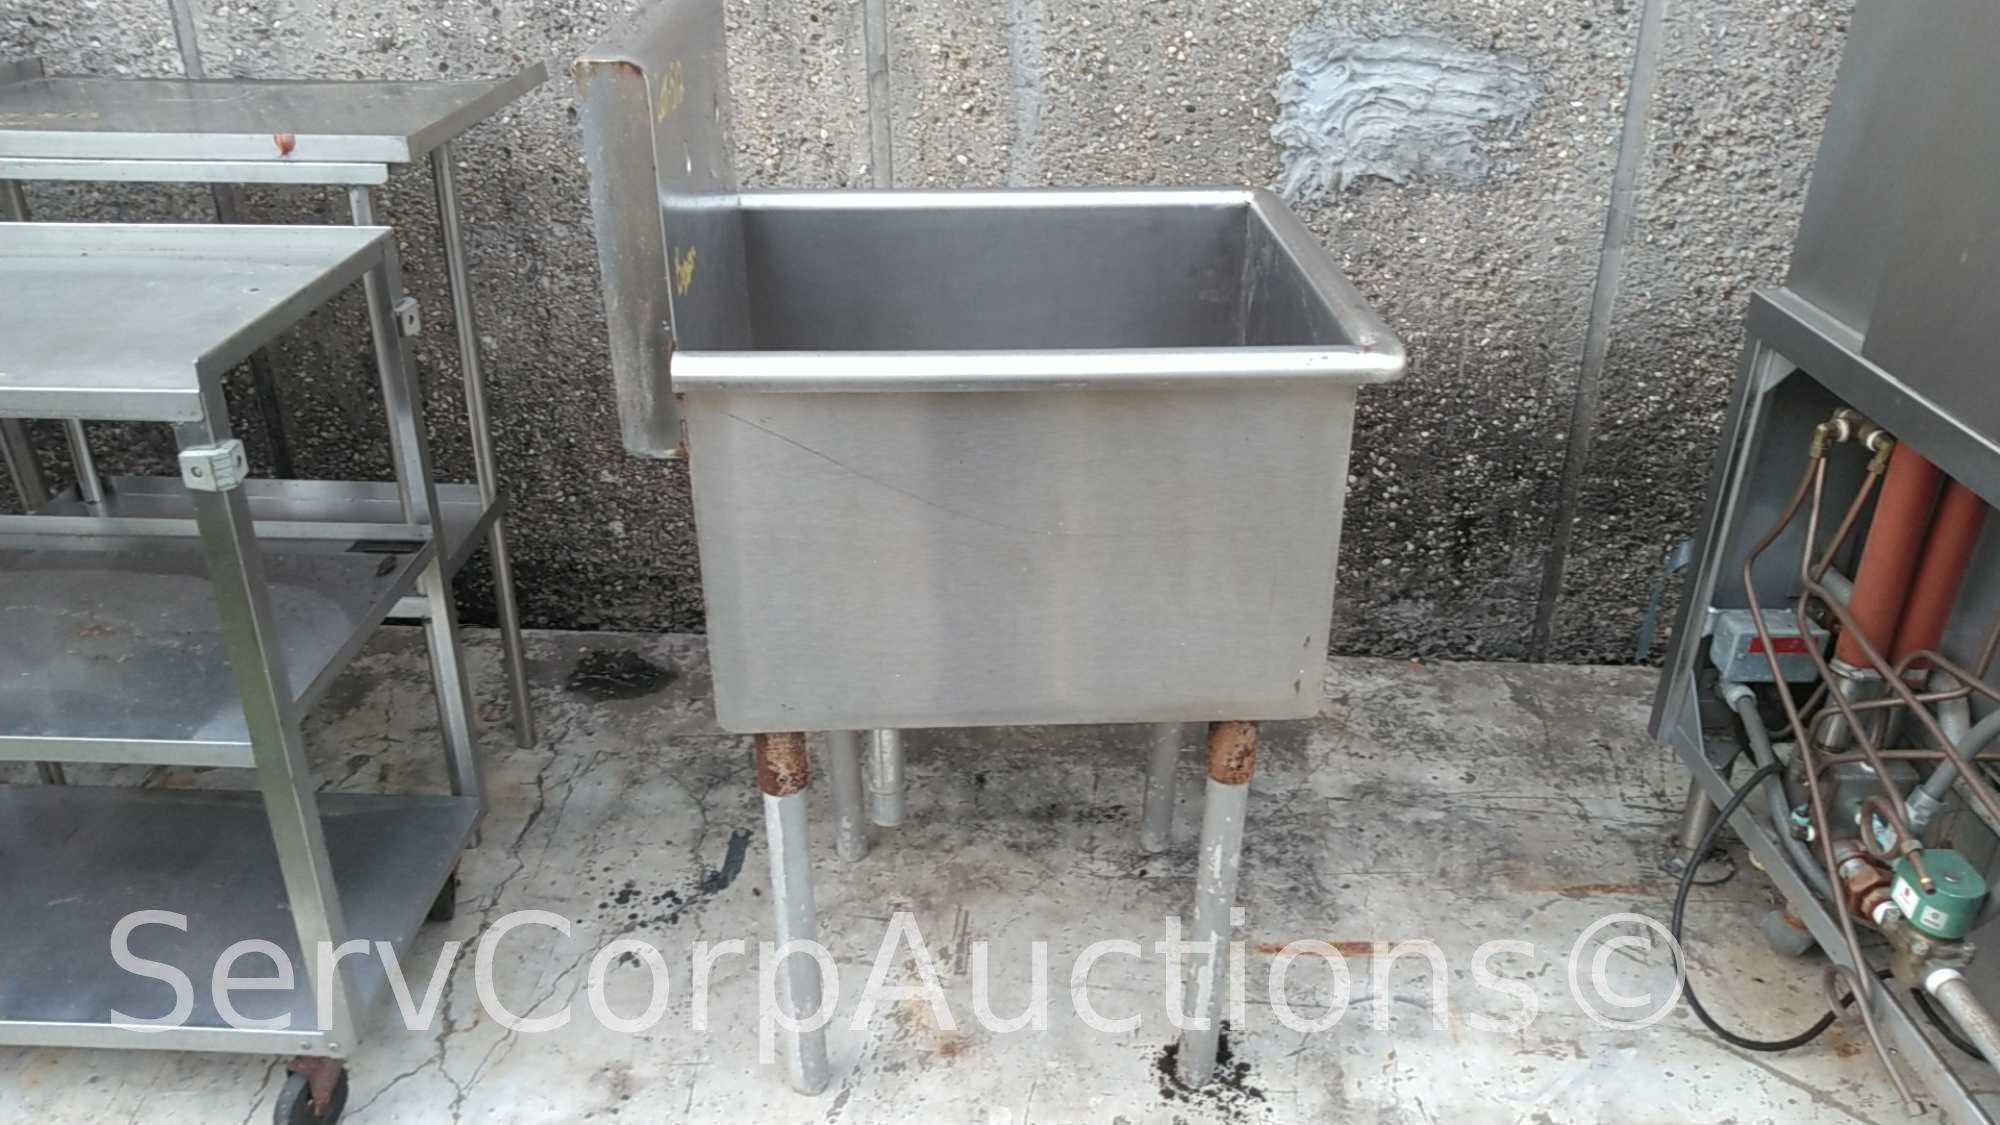 18" X 21" Stainless Sink